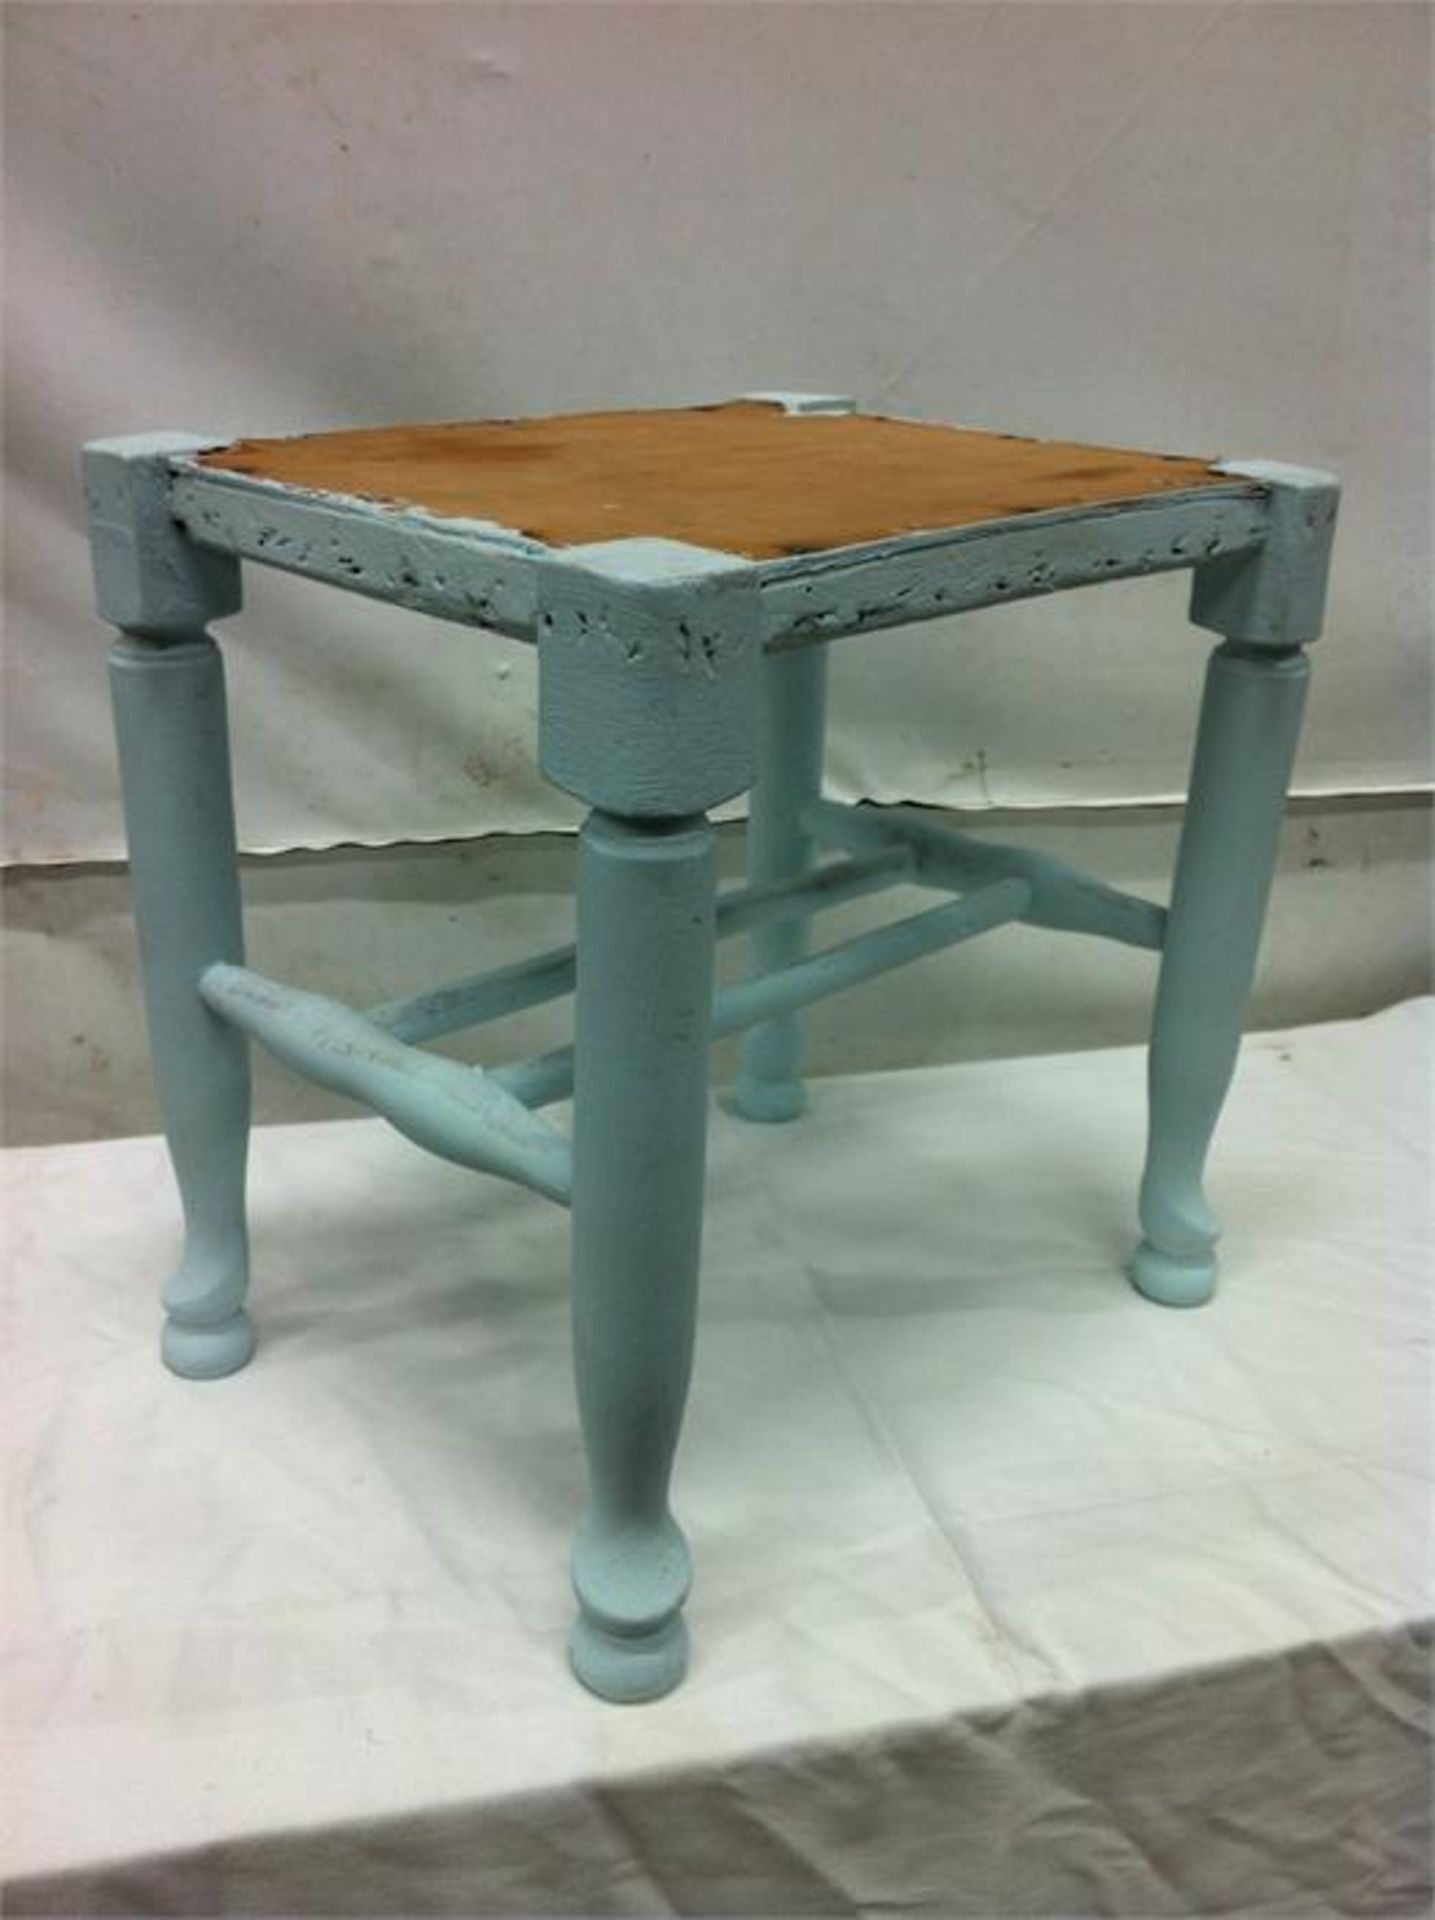 Pale blue side table (needs new top)